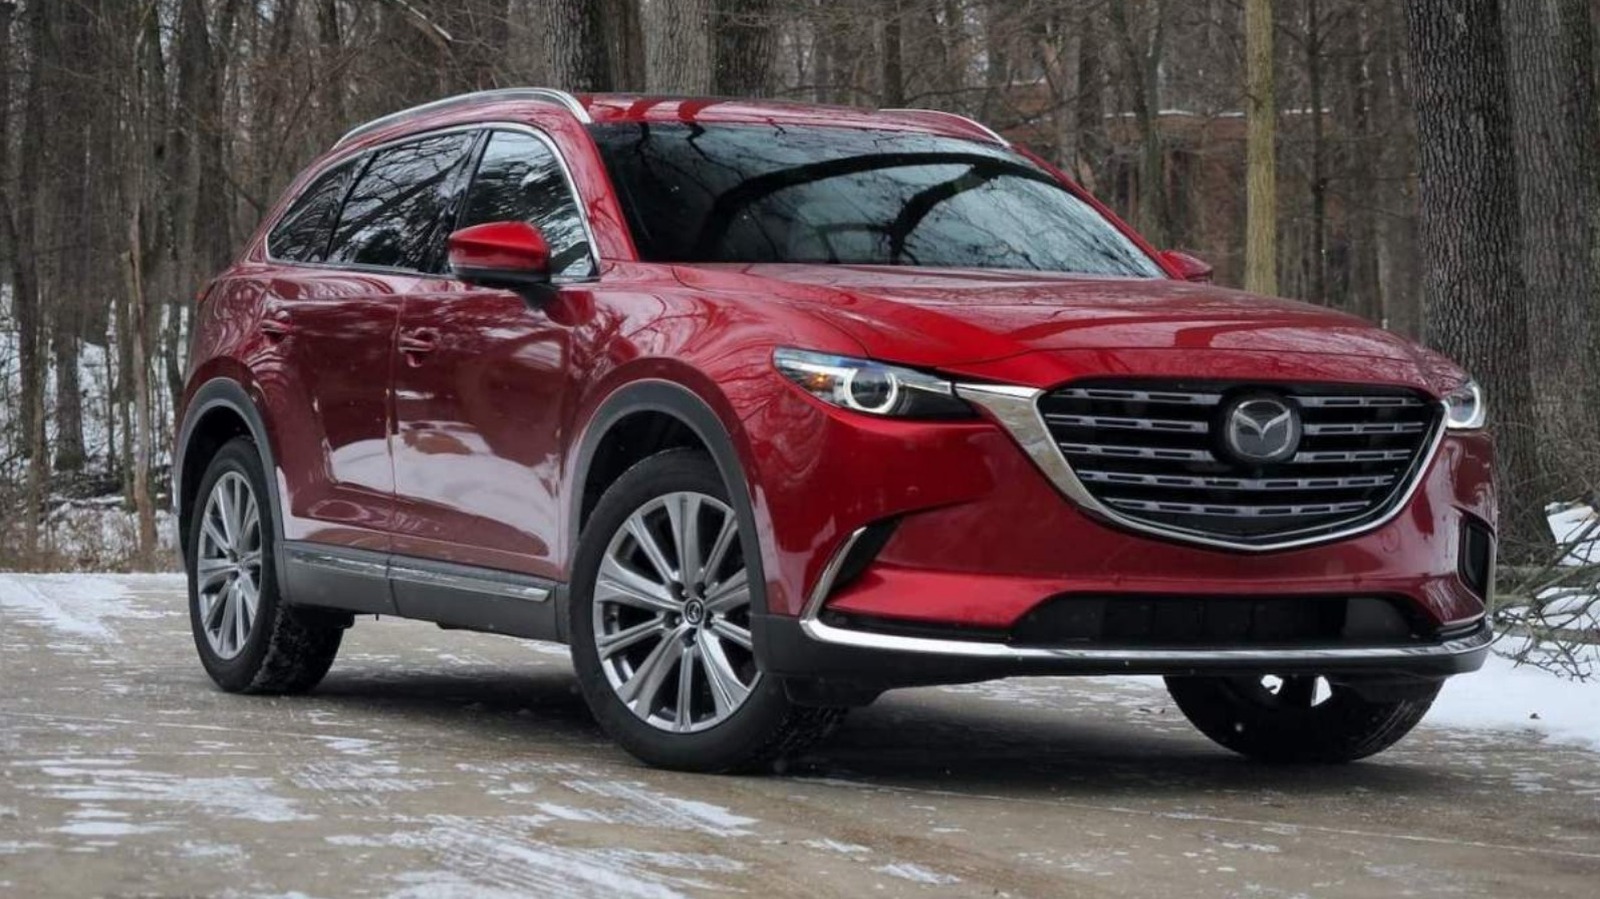 2021 Mazda CX-9 Review - The Sacrifices We Make For Family